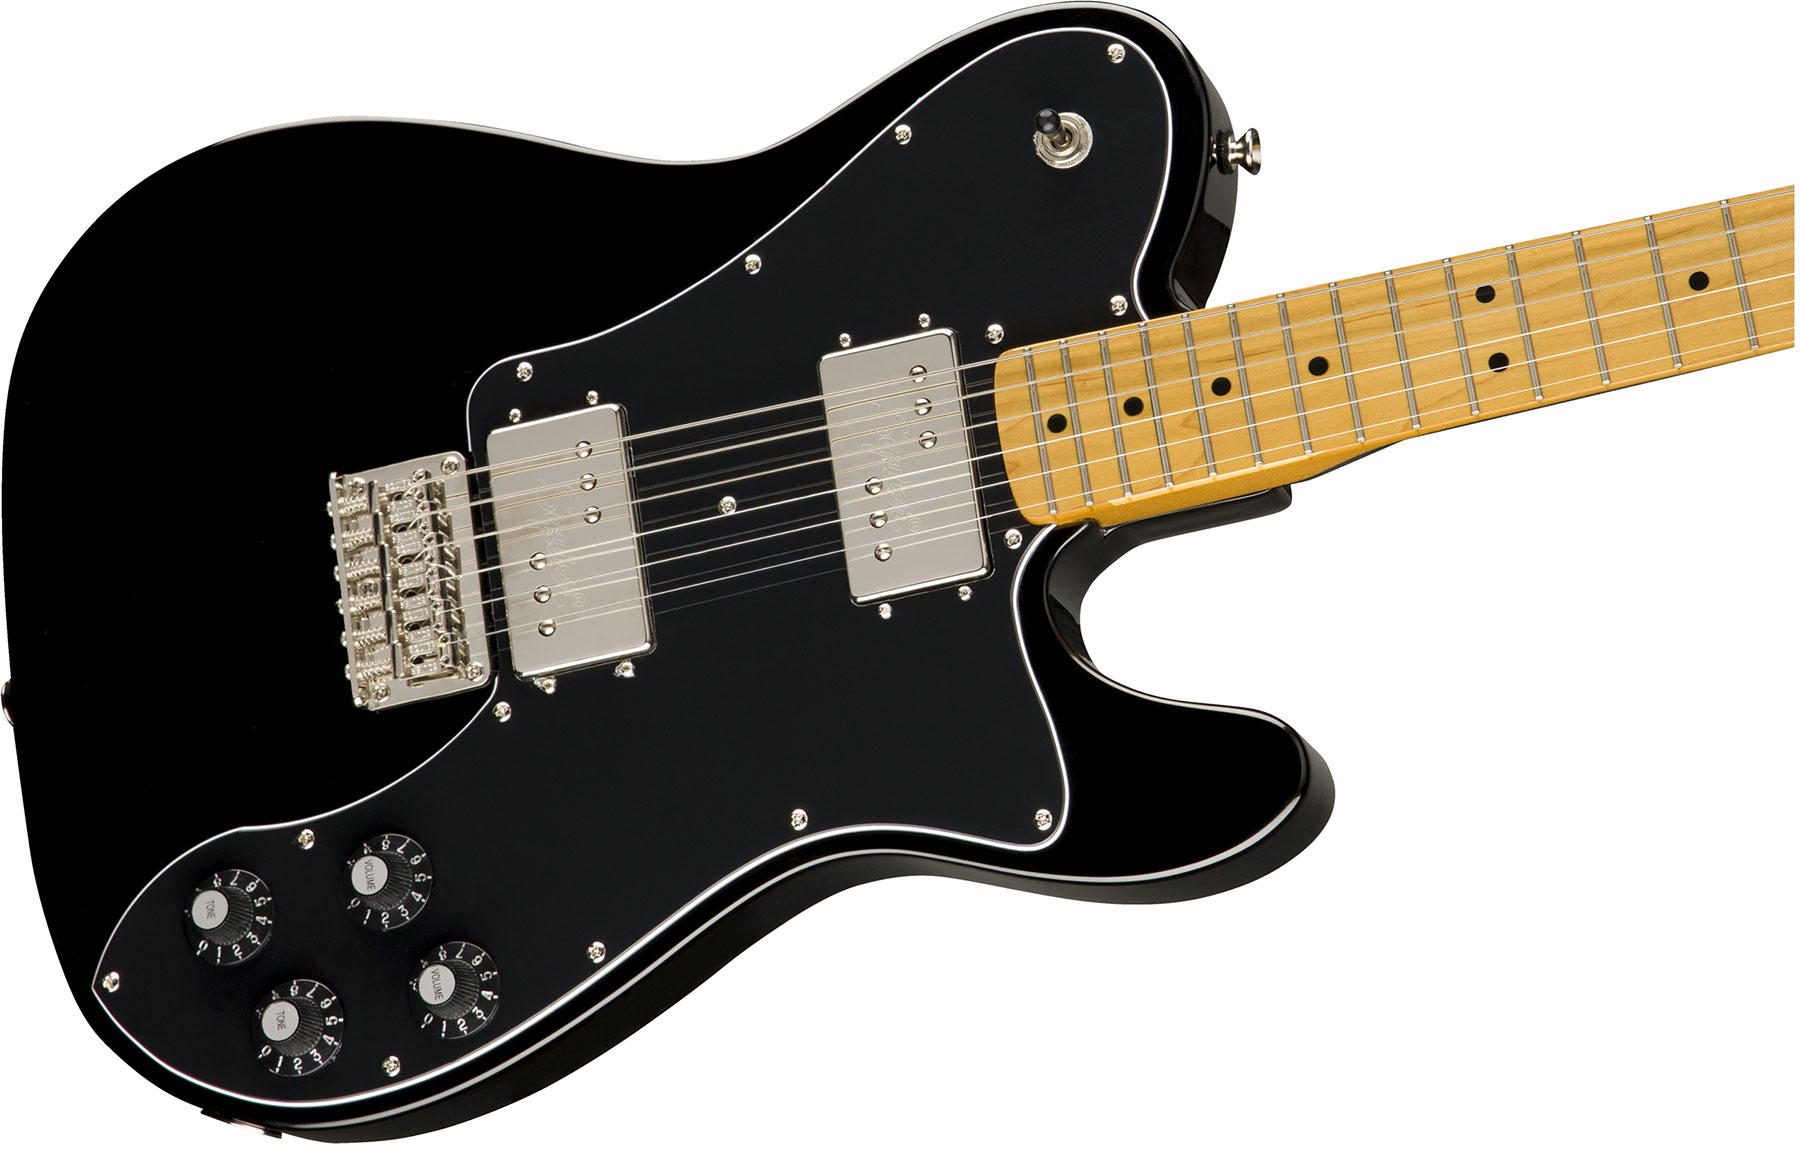 Squier Tele Deluxe Classic Vibe 70s 2019 Hh Mn - Black - Tel shape electric guitar - Variation 2